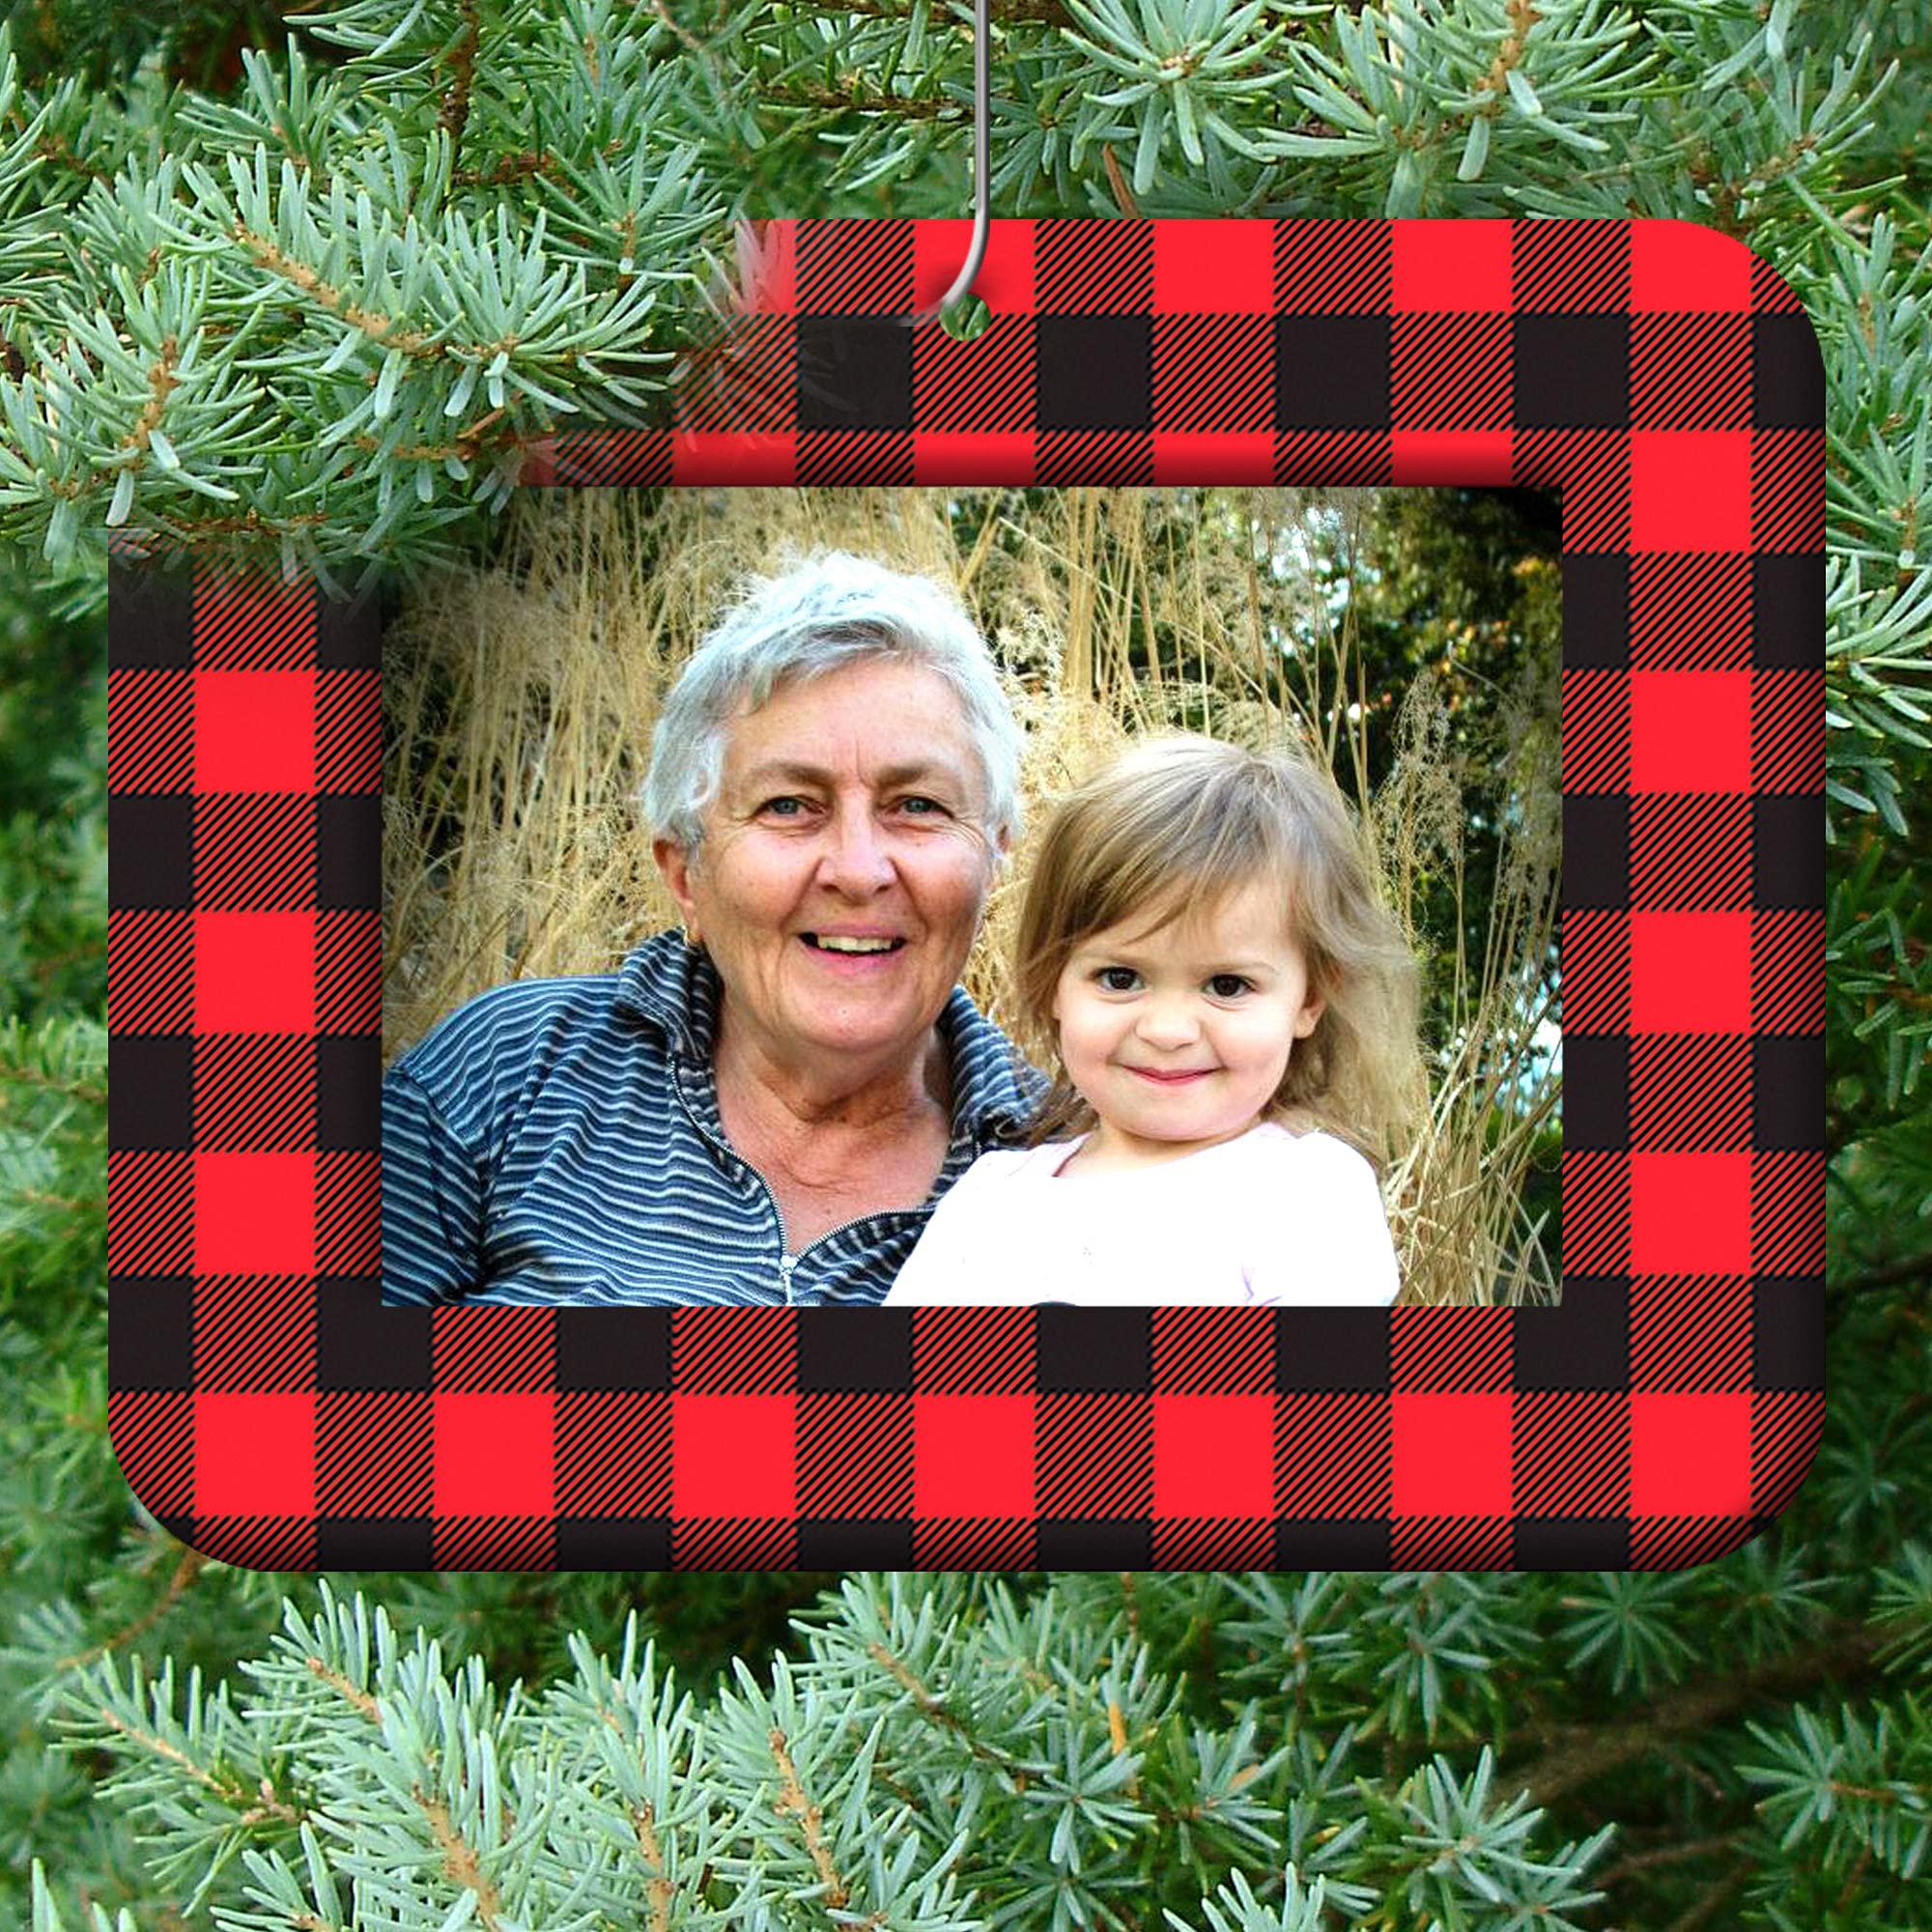 Expressly Yours! Photo Expressions the original mini photo christmas ornaments, magnetic easy-load rustic buffalo plaid picture frame ornament, includes photo p